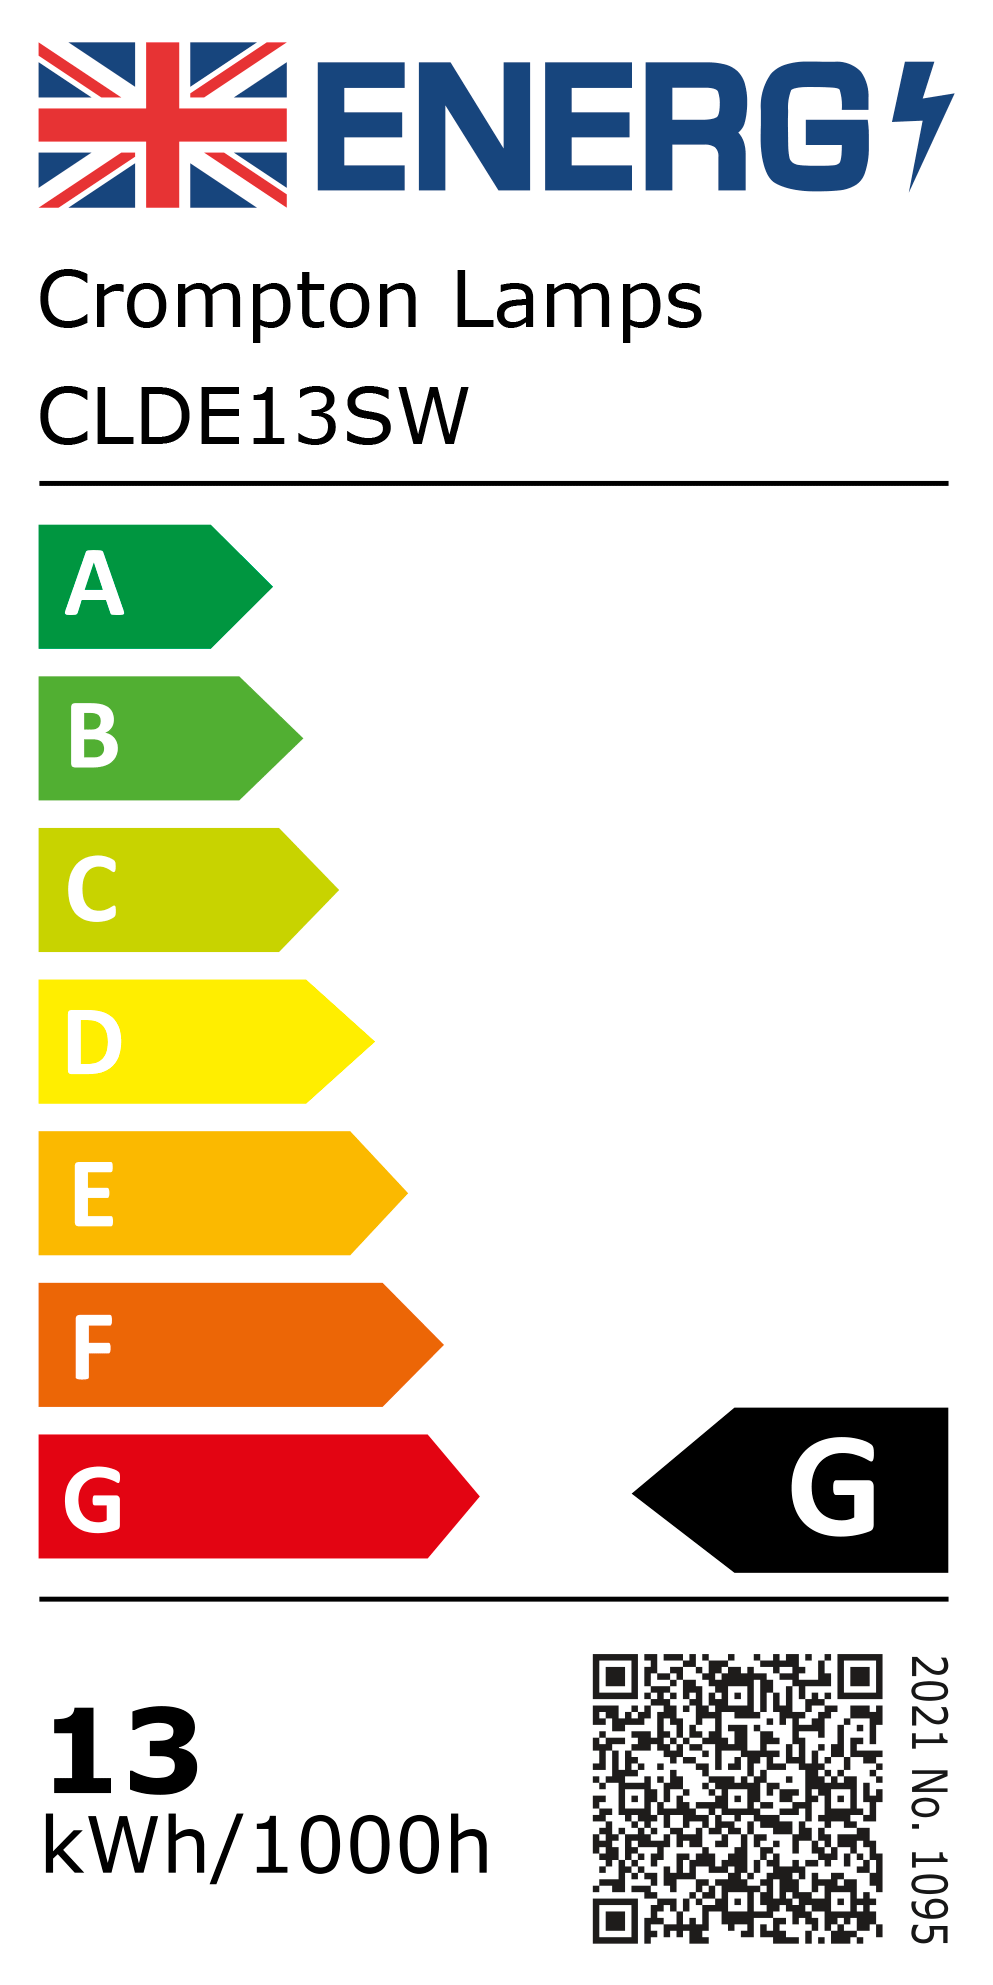 New 2021 Energy Rating Label: Stock Code CLDE13SW